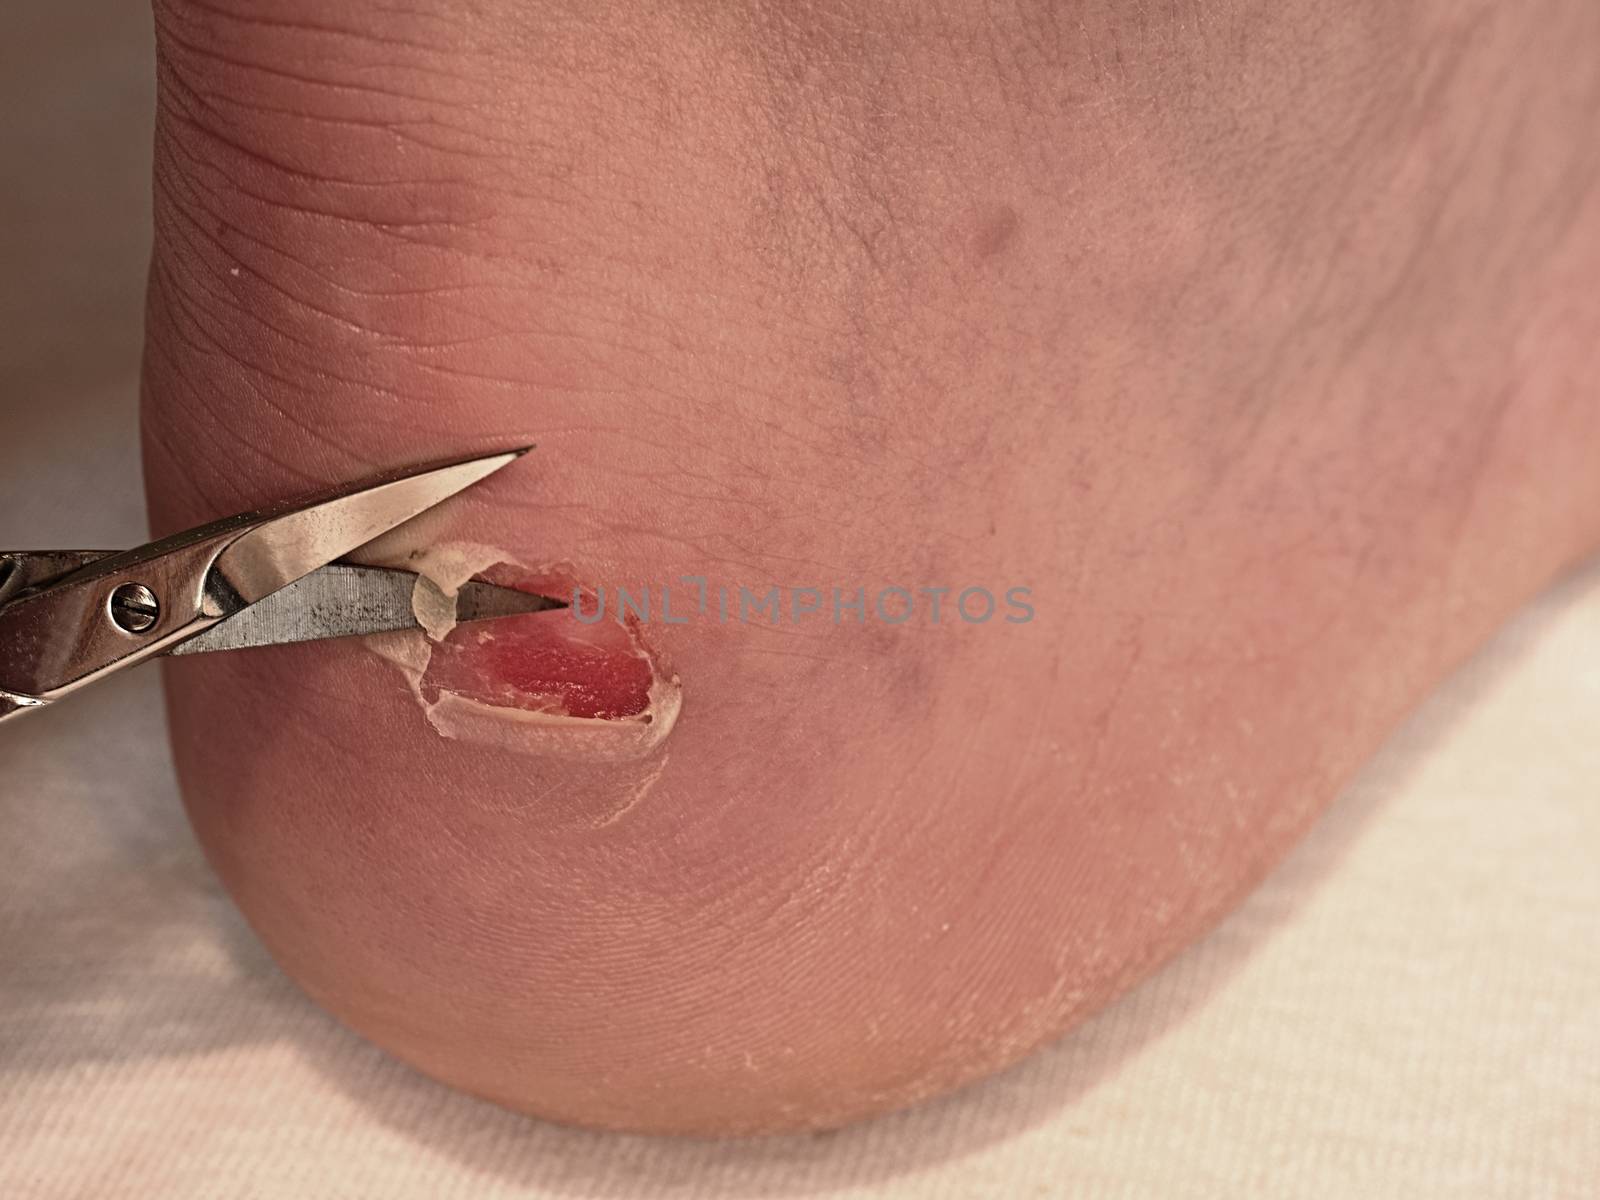 Small bended scissors cut skin at  cracked blister on man heel. Painful place with torn skin, by rdonar2